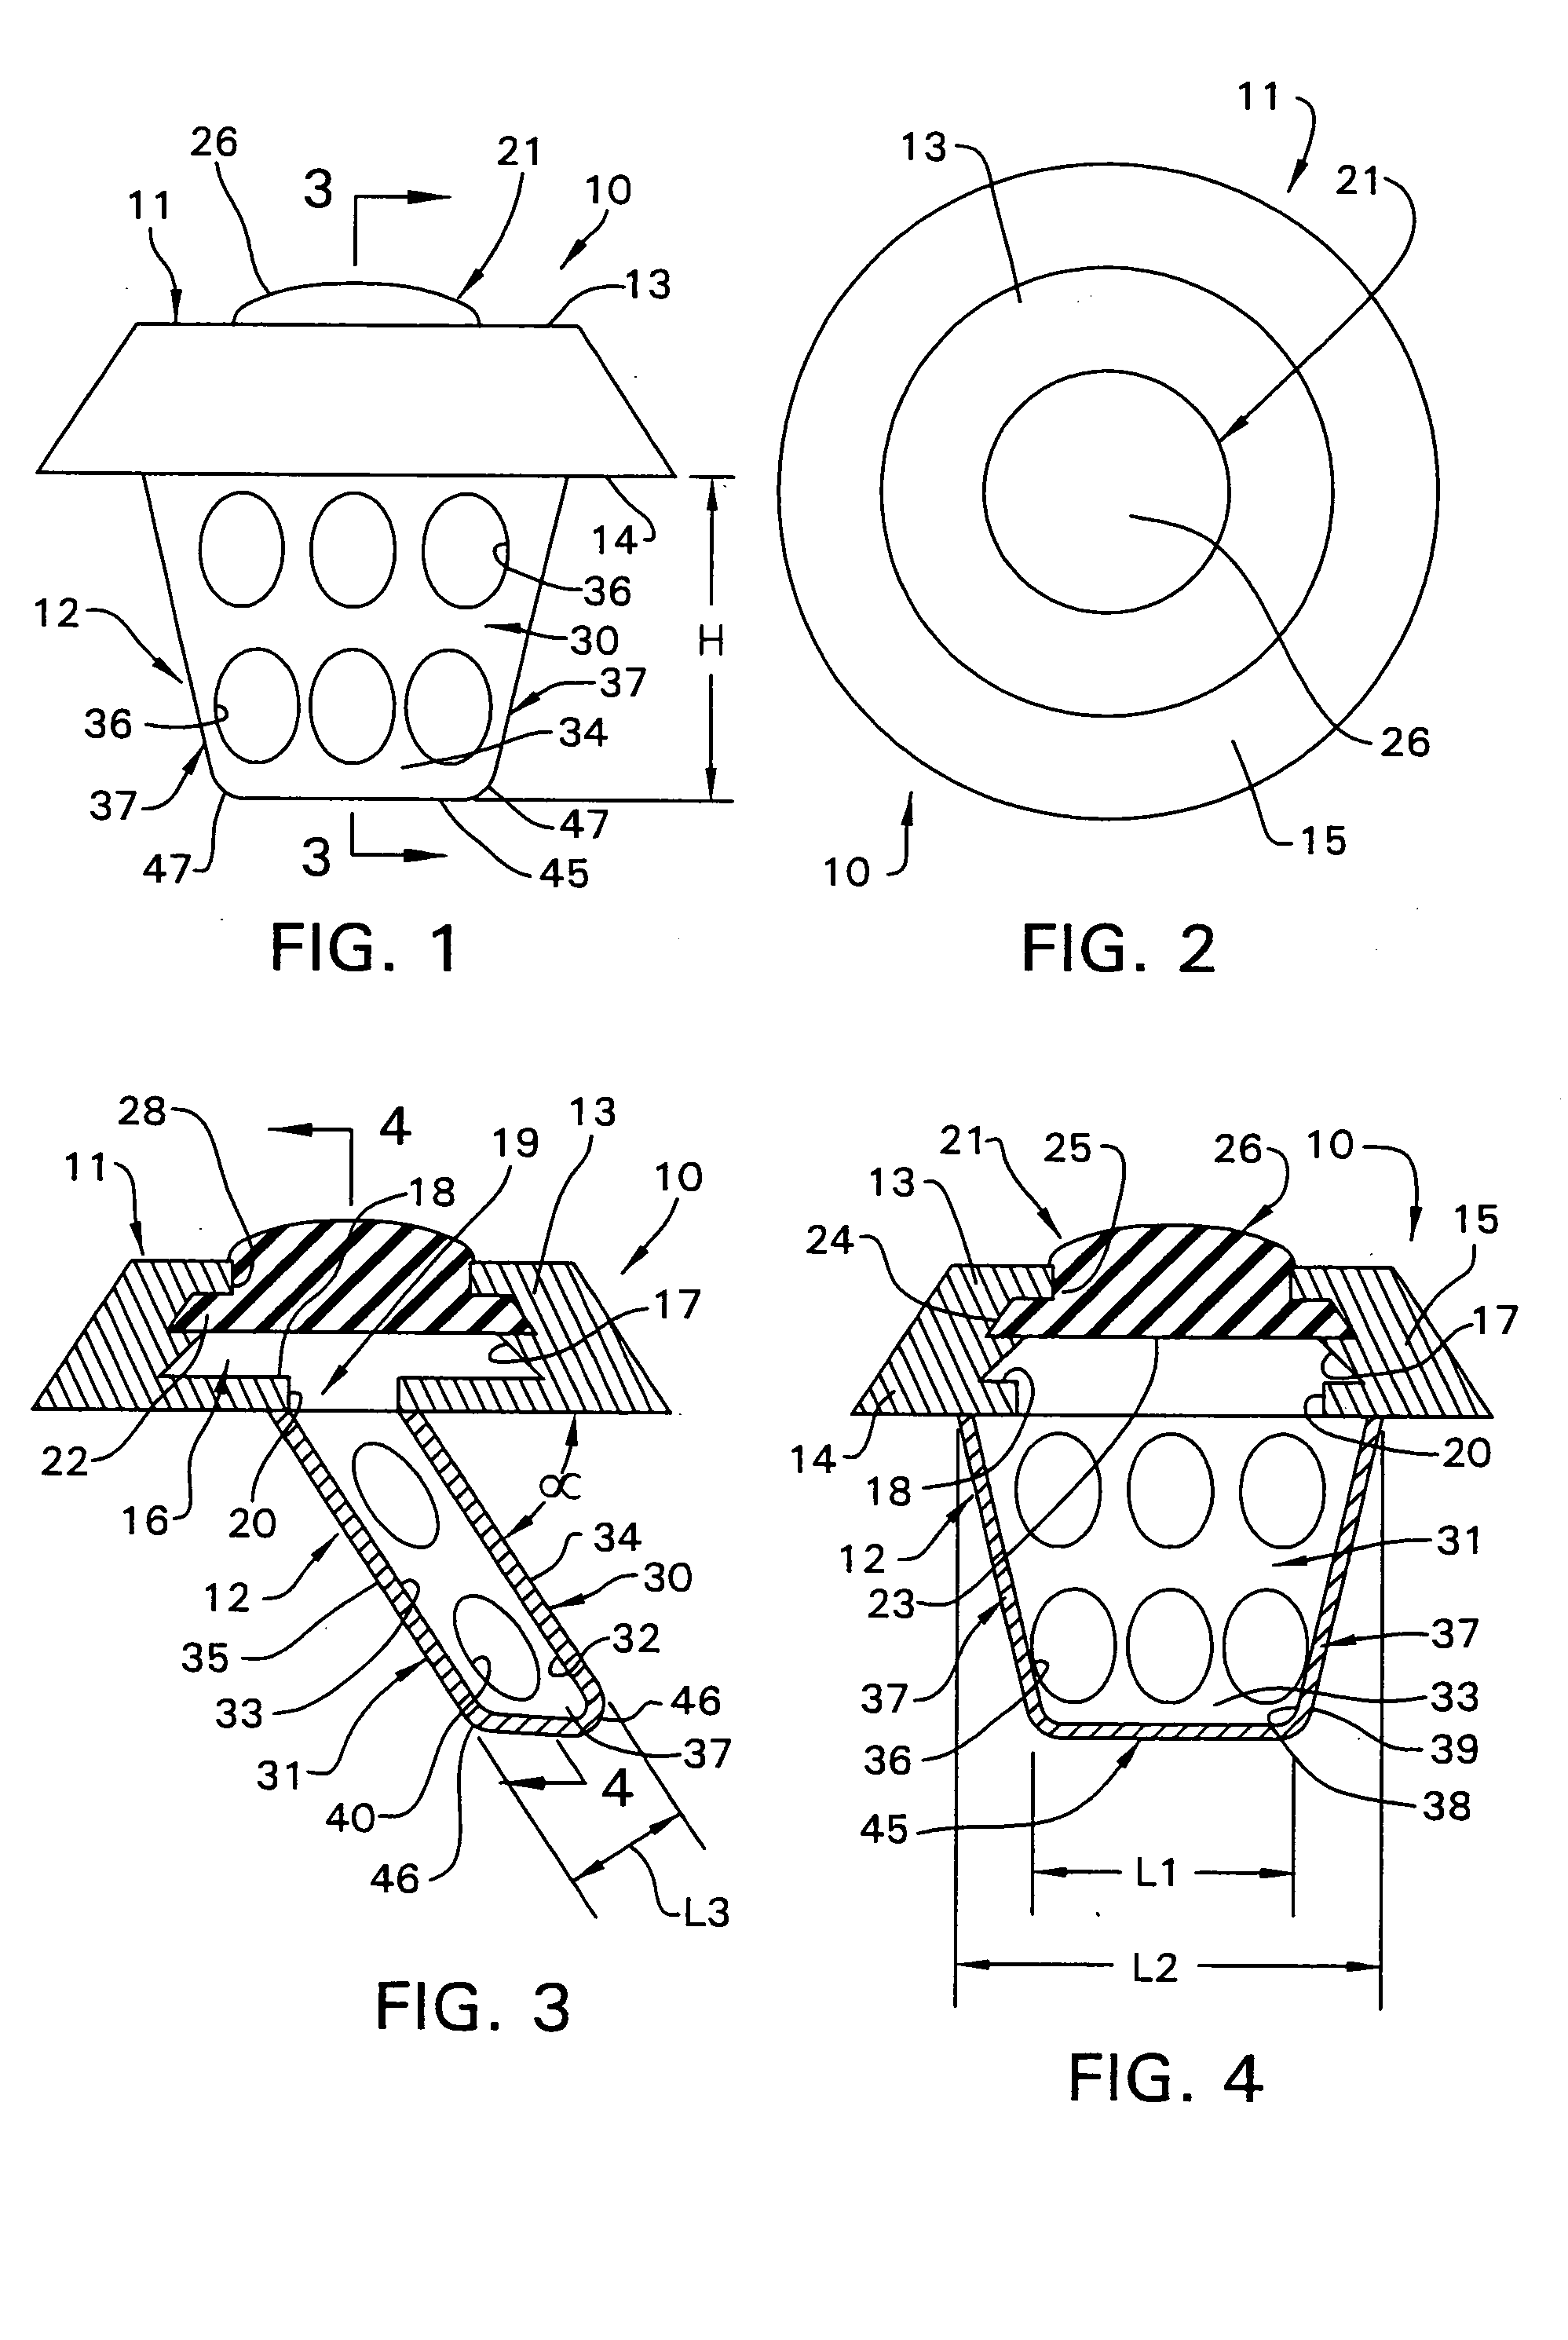 Surgical implant and method of accessing cerebrospinal fluid